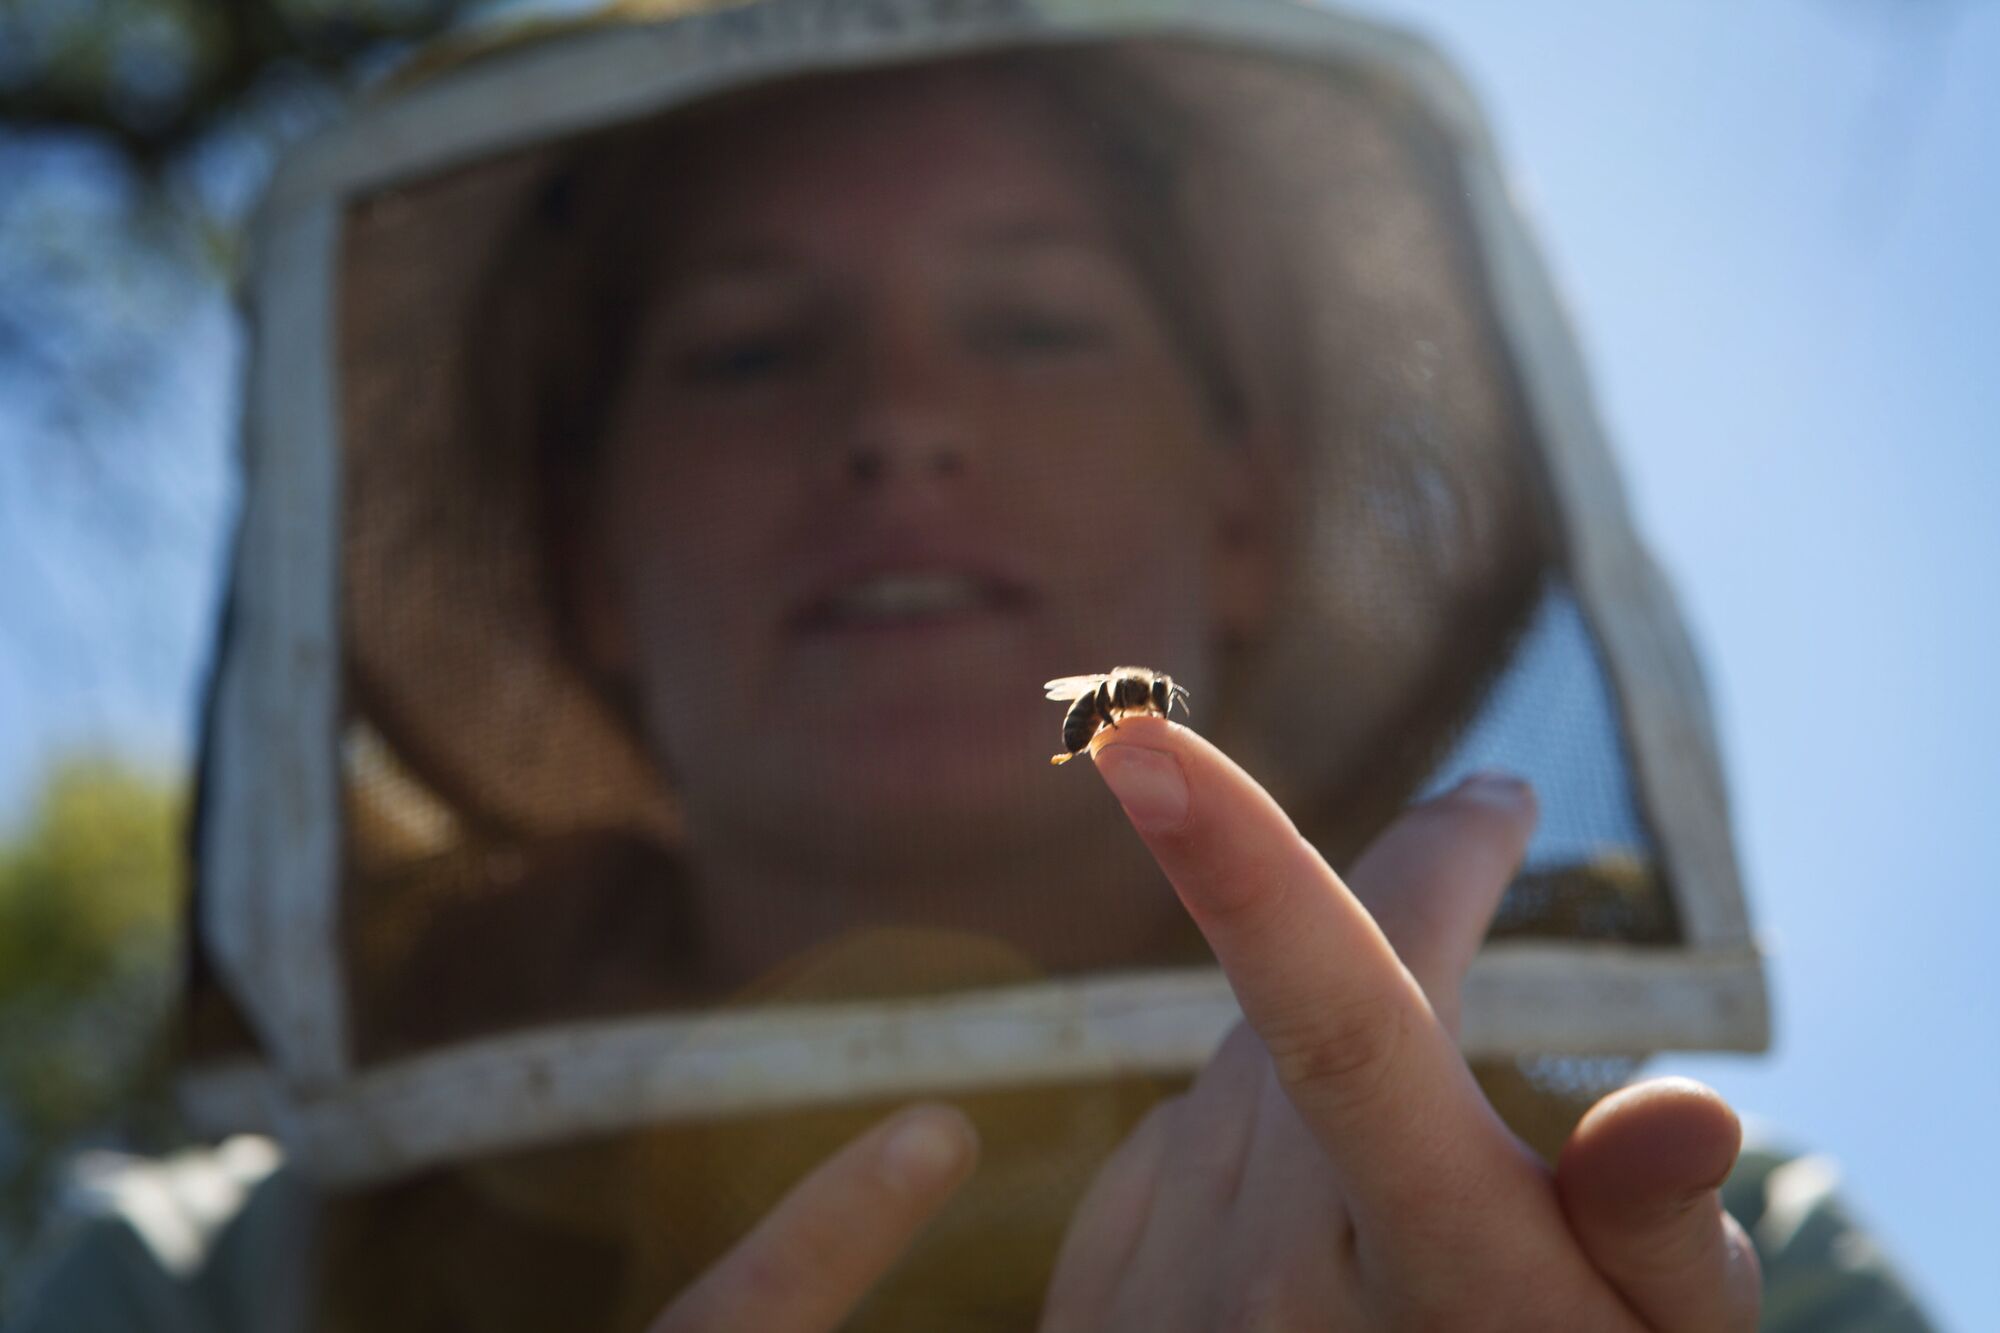 A baby bee rests on the index finger of a beekeeper.